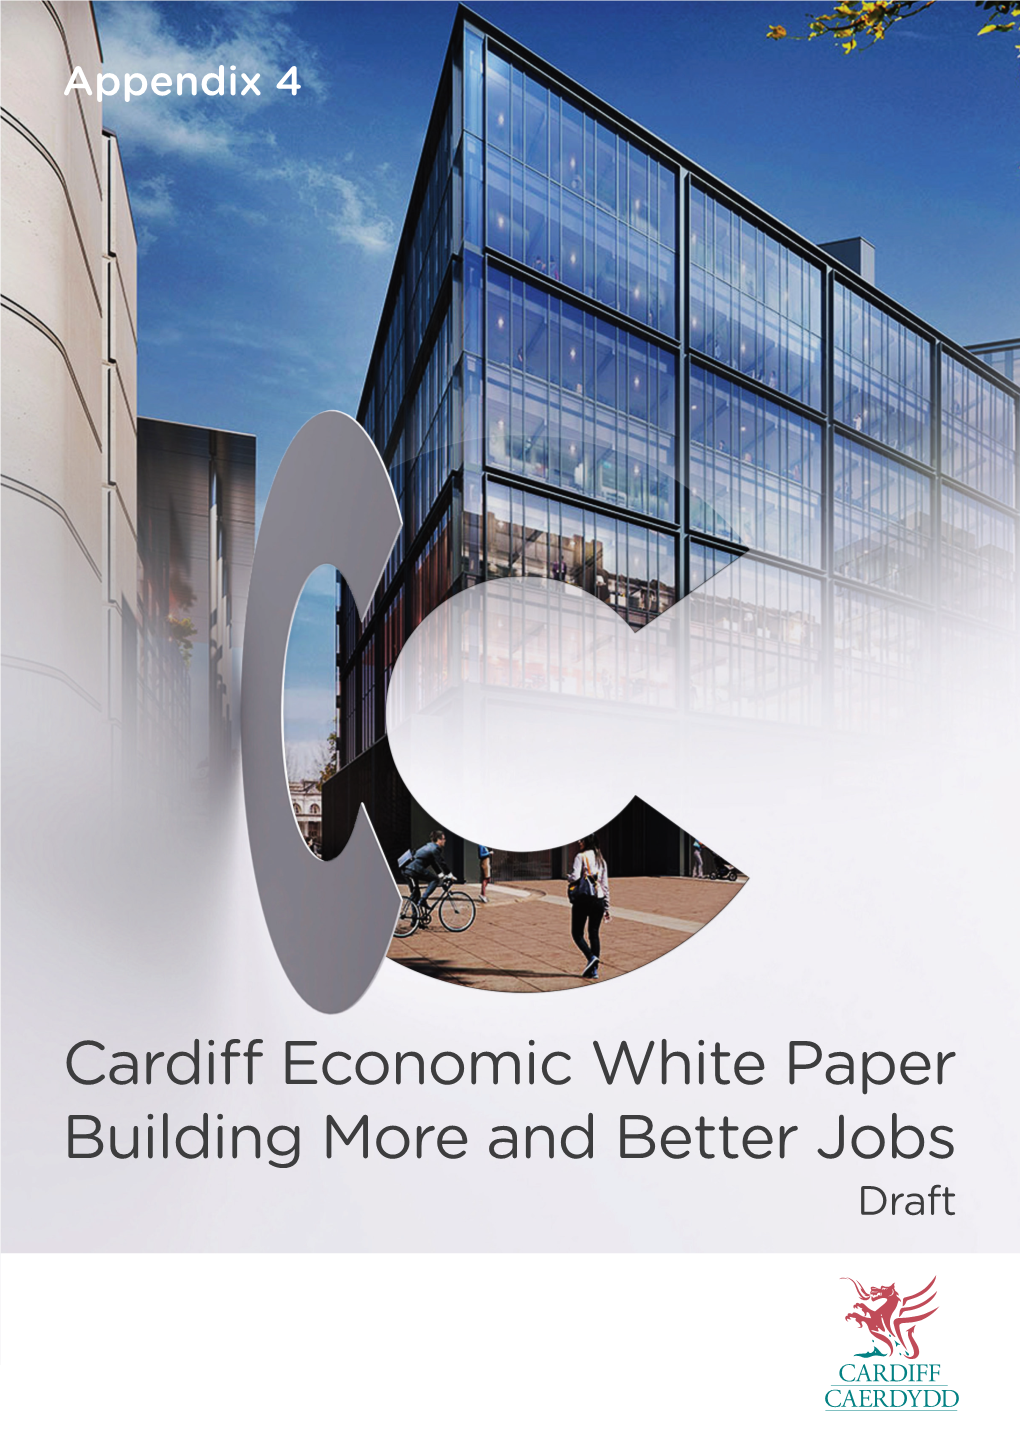 Cardiff Economic White Paper Building More and Better Jobs Draft 2 CARDIFF ECONOMY